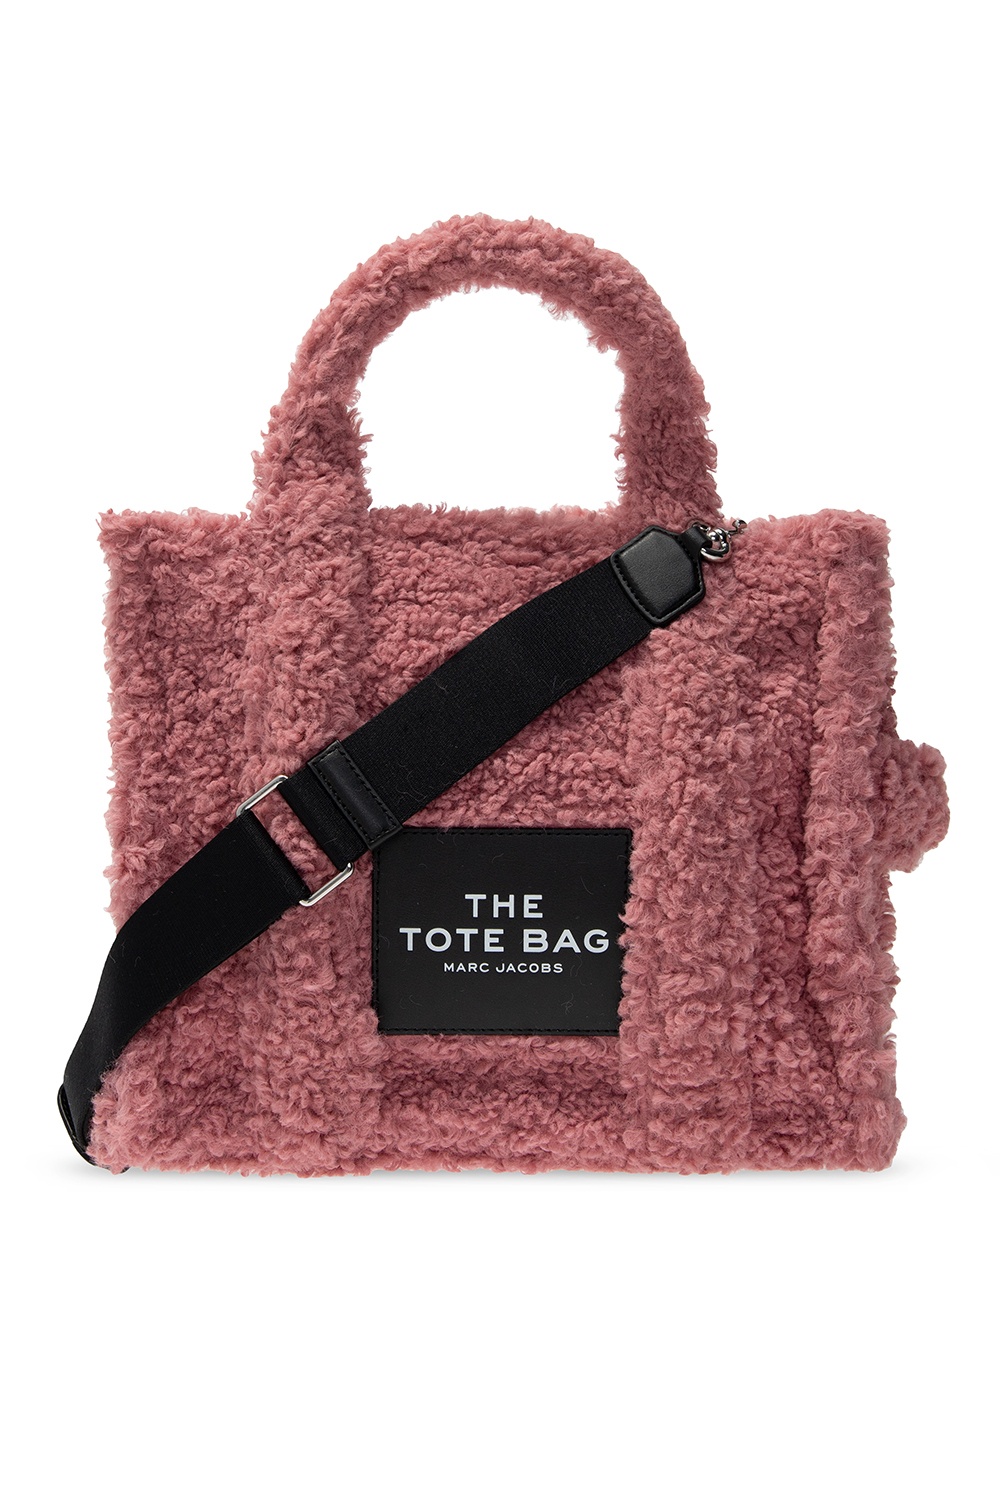 Furry Tote Bag Marc Jacobs Webex Breakout Rooms Tutorial